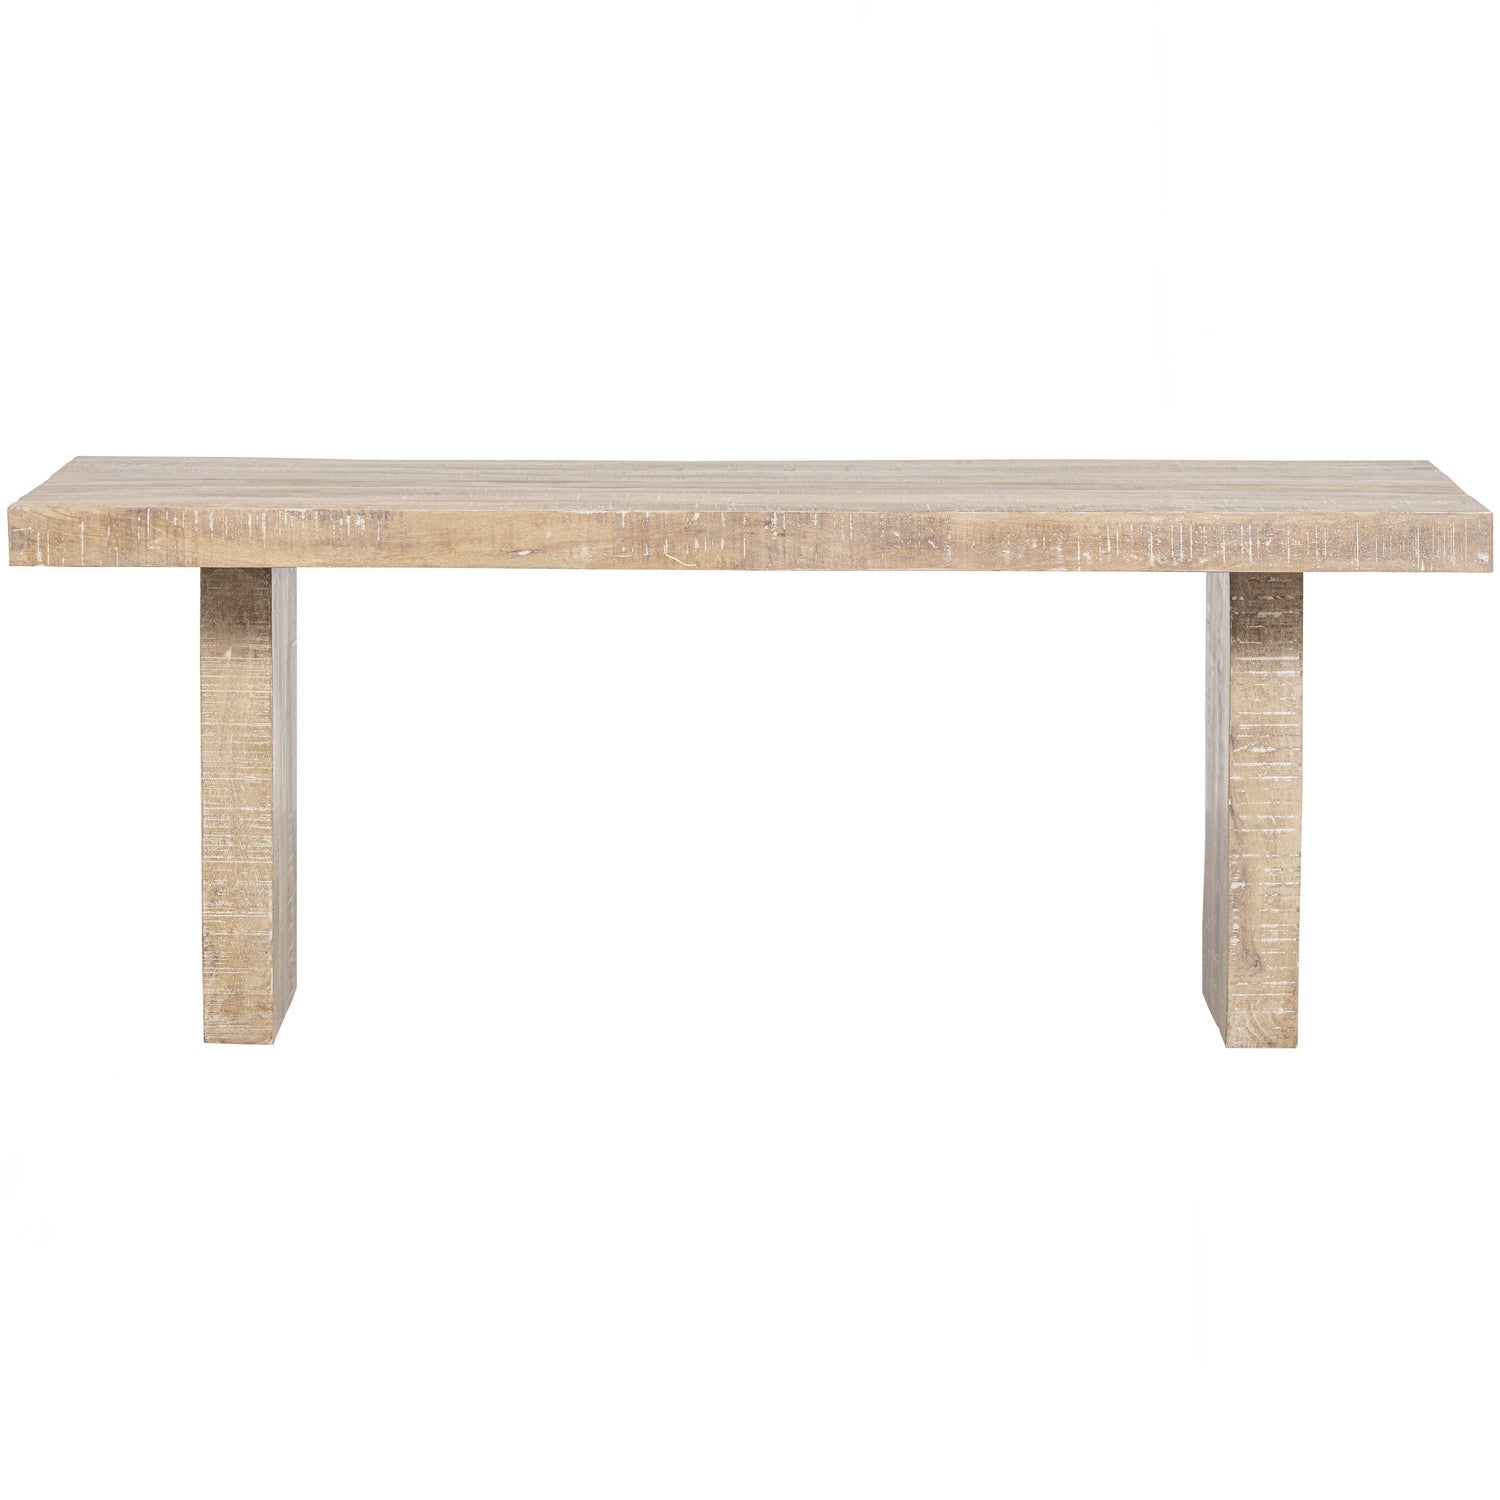 BALK DINING TABLE WOOD NATURAL 220x90CM